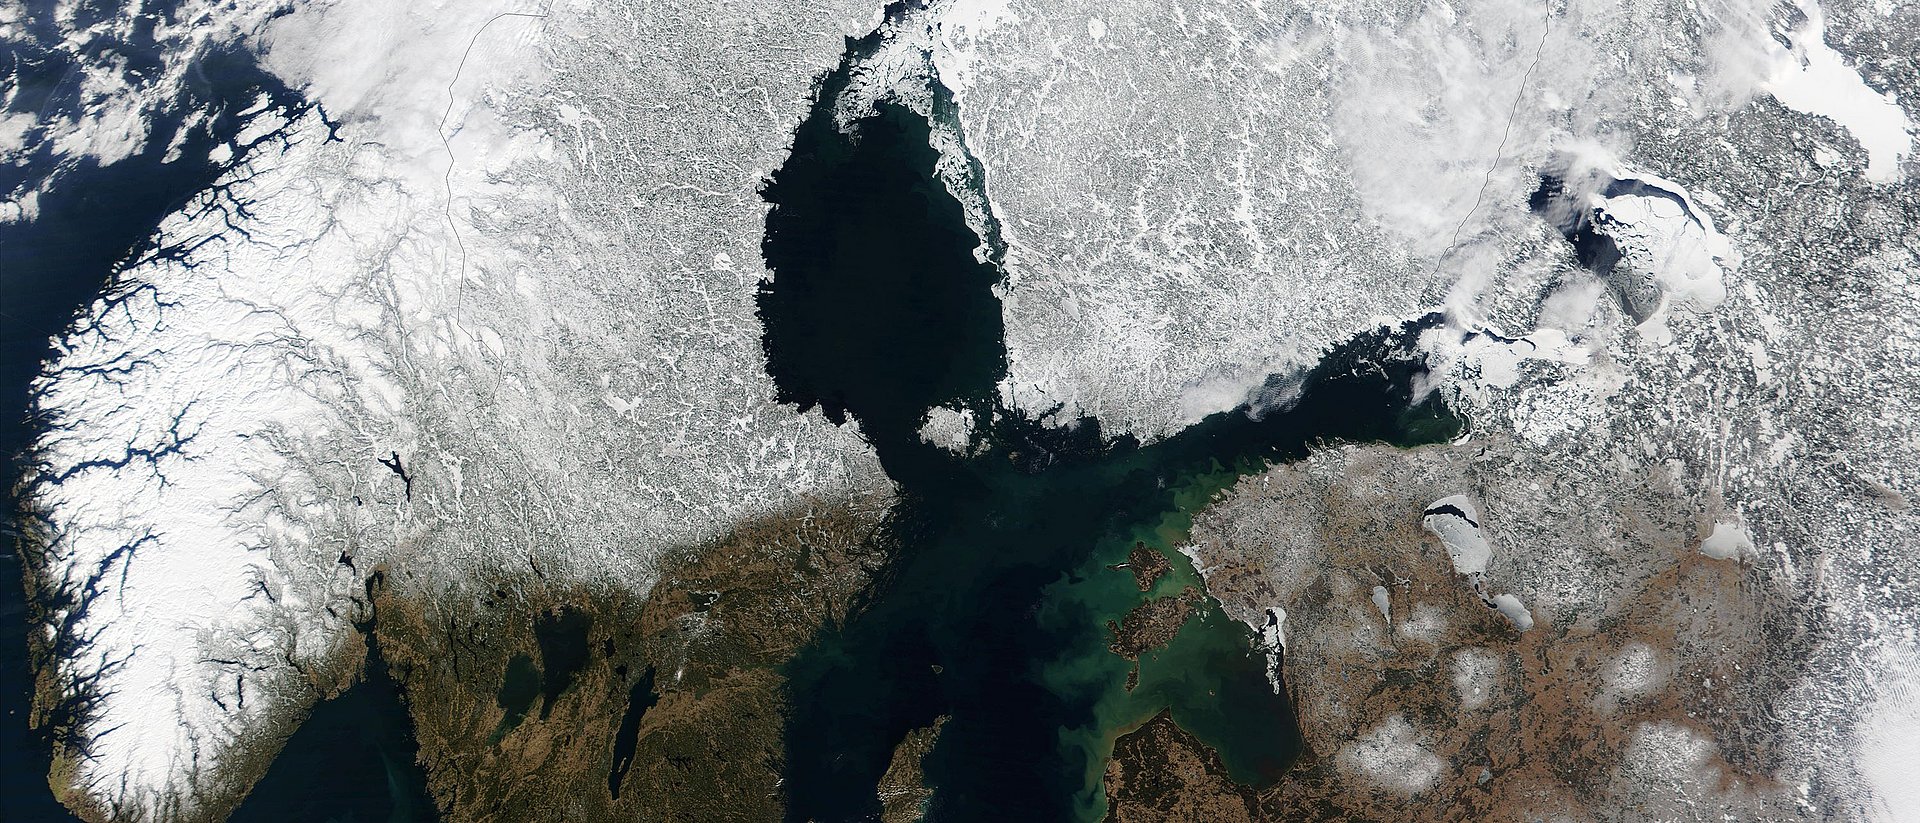 Researchers have measured sea level rise in the North and Baltic Seas precisely and comprehensively for the first time. Sea ice - as seen here in the satellite image of the Baltic Sea - can make measurements difficult.